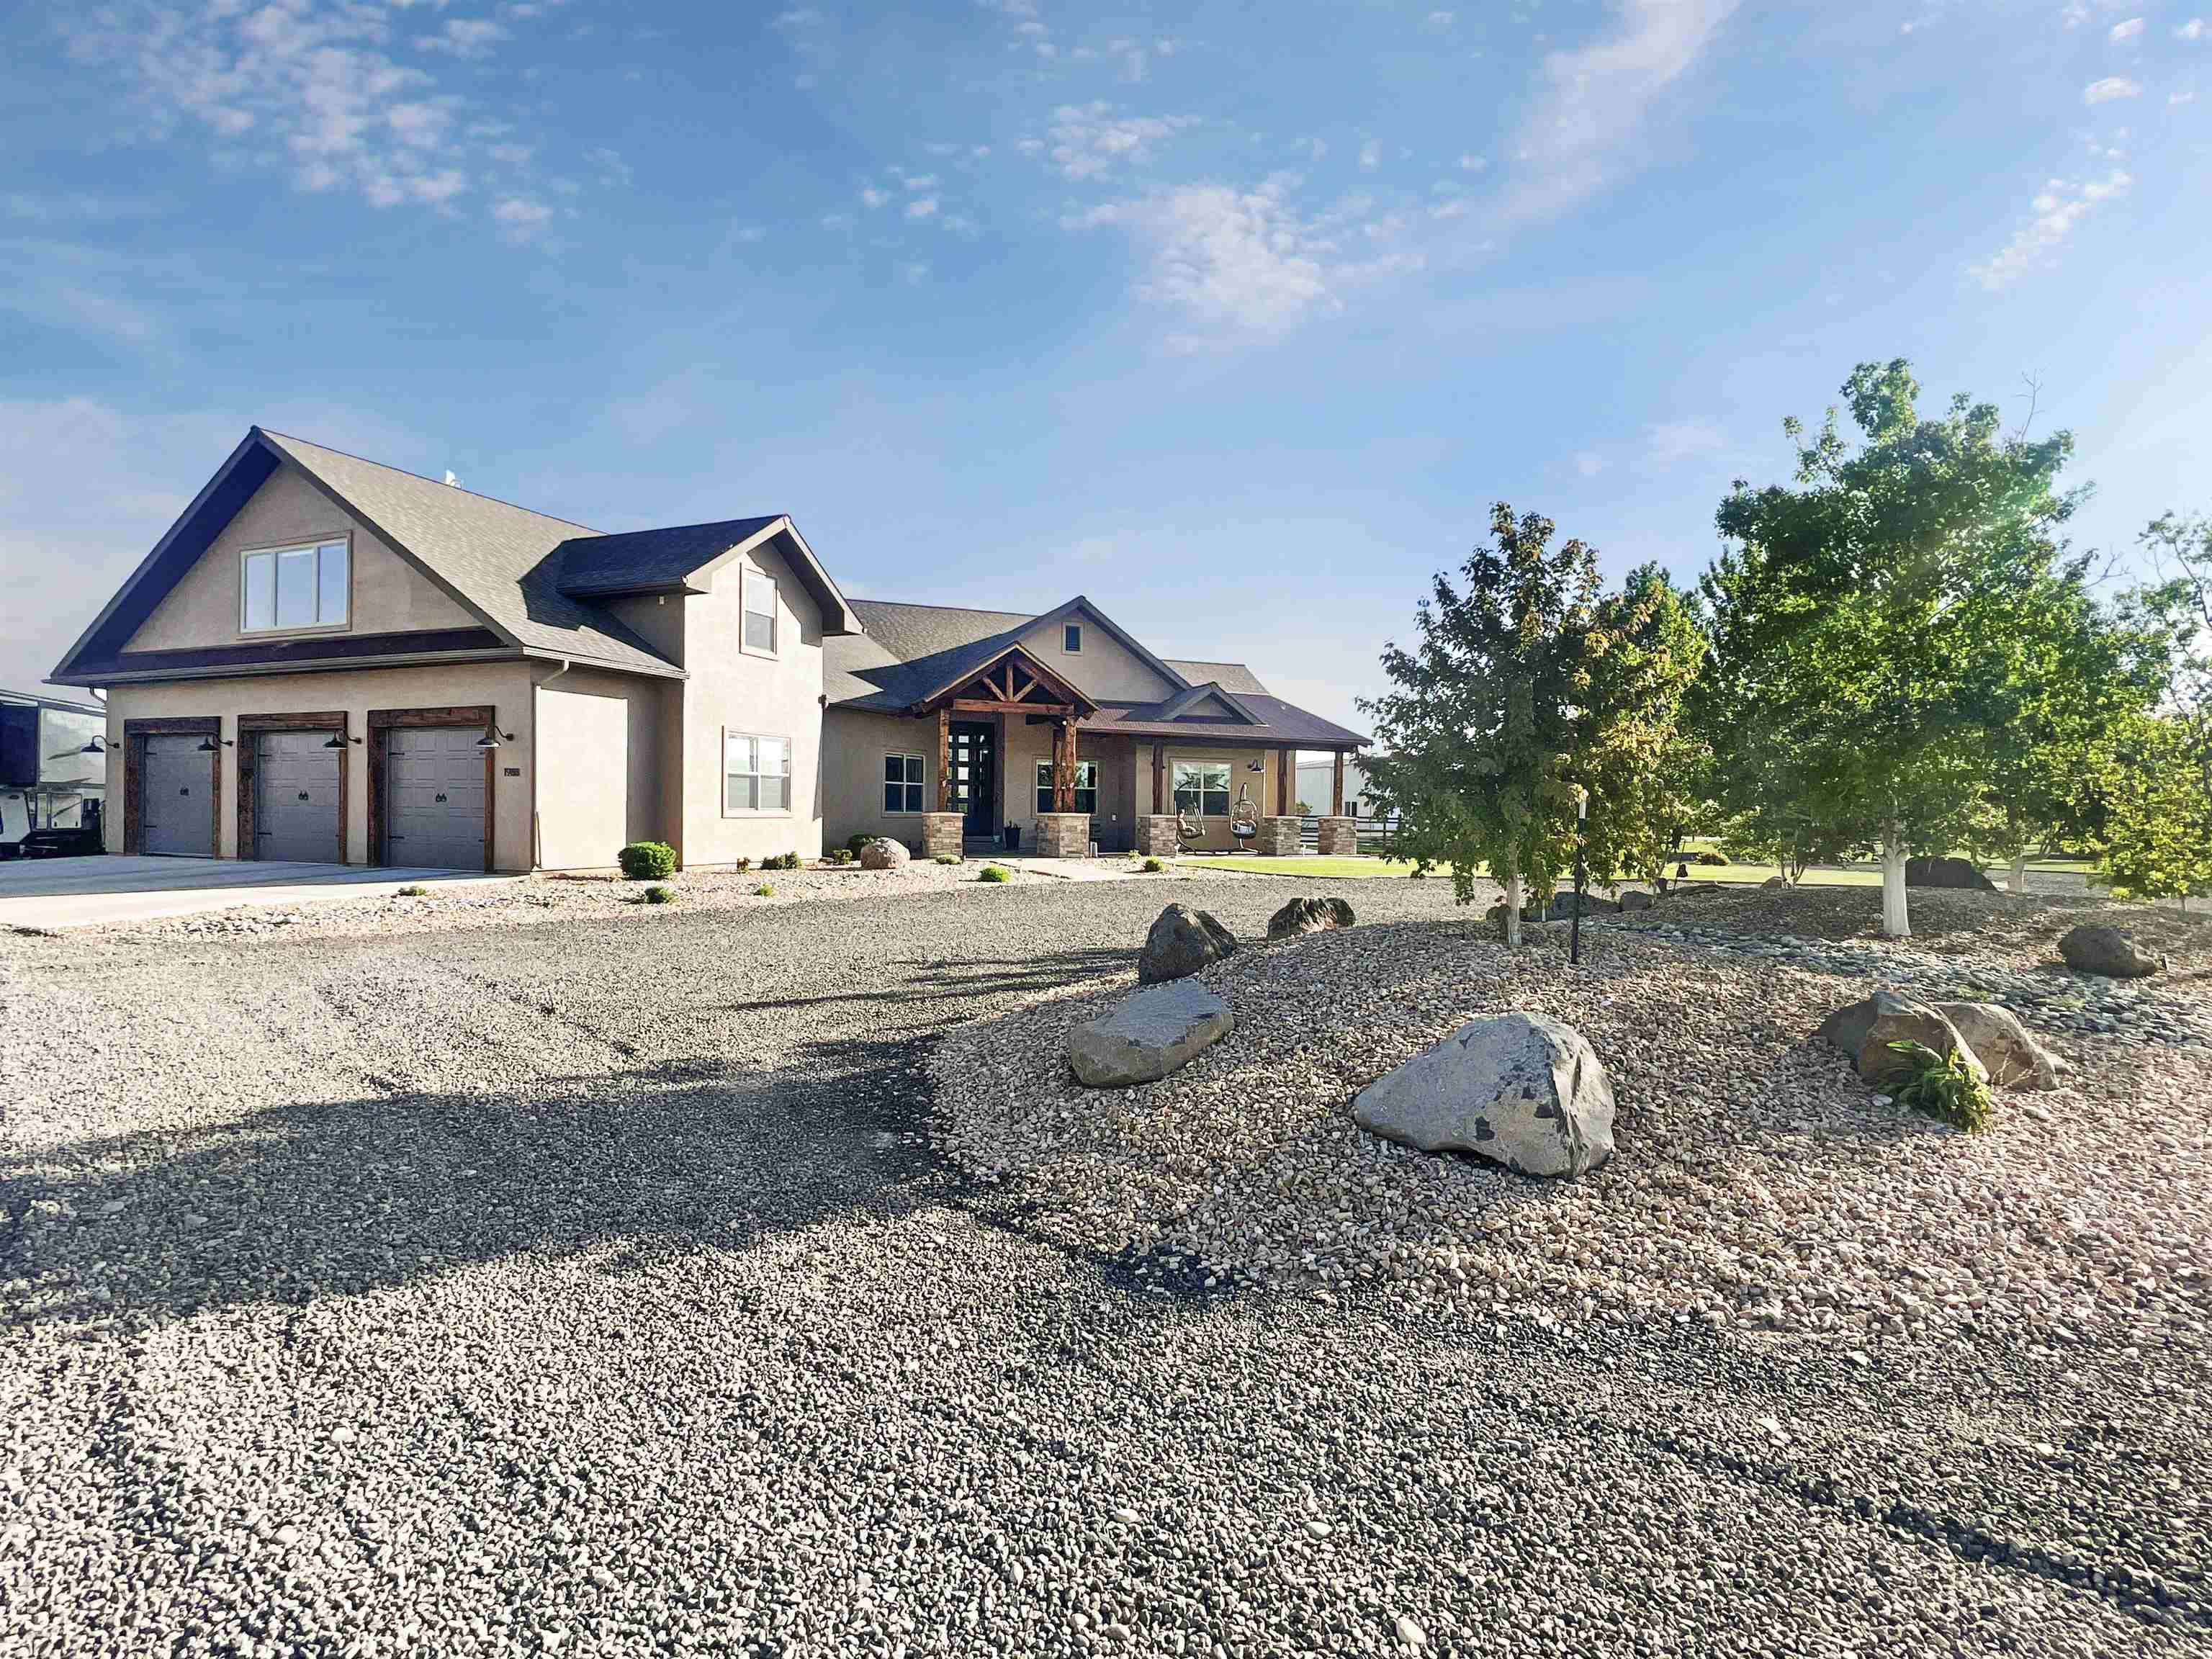 This STUNNING Maves Construction built home was featured in the 2013 Parade of Homes. Rustic Chic styling combines the rustic look Western Colorado loves with accents of modern design. This home will appeal to the most discriminating taste. Thoughtfully designed square footage with everything you would want in a home. Expansive kitchen with custom alder cabinetry features a steel grey stain accented by ivory alongside the 36" induction cooktop with custom designed hood. Pullouts throughout this kitchen will give you more storage than you will know what to do with in addition to the HUGE hidden walk-in pantry with prep sink and coffee bar. The home was designed with entertaining in mind, from the wide open living/dining/kitchen space to extending out to the covered stamped concrete patio with built-in BBQ and fireplace. Dining room with timber ceiling, modern fireplace wall and dramatic lighting. The primary suite is truly a sanctuary with a spa-like bathroom featuring multi-head walk-in shower and free-standing bathtub. Also on the main floor are two bedrooms, each with walk-in closets separated by a jack and jill bathroom, office/4th bedroom just off another 3/4 bathroom and large laundry with beautiful custom knotty alder teal cabinetry. Staircase with cable railing leads upstairs to a HUGE bonus room with wet bar/beverage cooler/microwave, 5th bedroom and bathroom. Situated on 2 acres giving you plenty of elbow room without feeling like you are in the middle of nowhere! Fully fenced dog run on side of house. RV Parking with hookups and waste dump! North facing patio provides you with dramatic sunset views of the Bookcliffs and Monument views out the front. Seller is licensed real estate broker in state of Colorado.